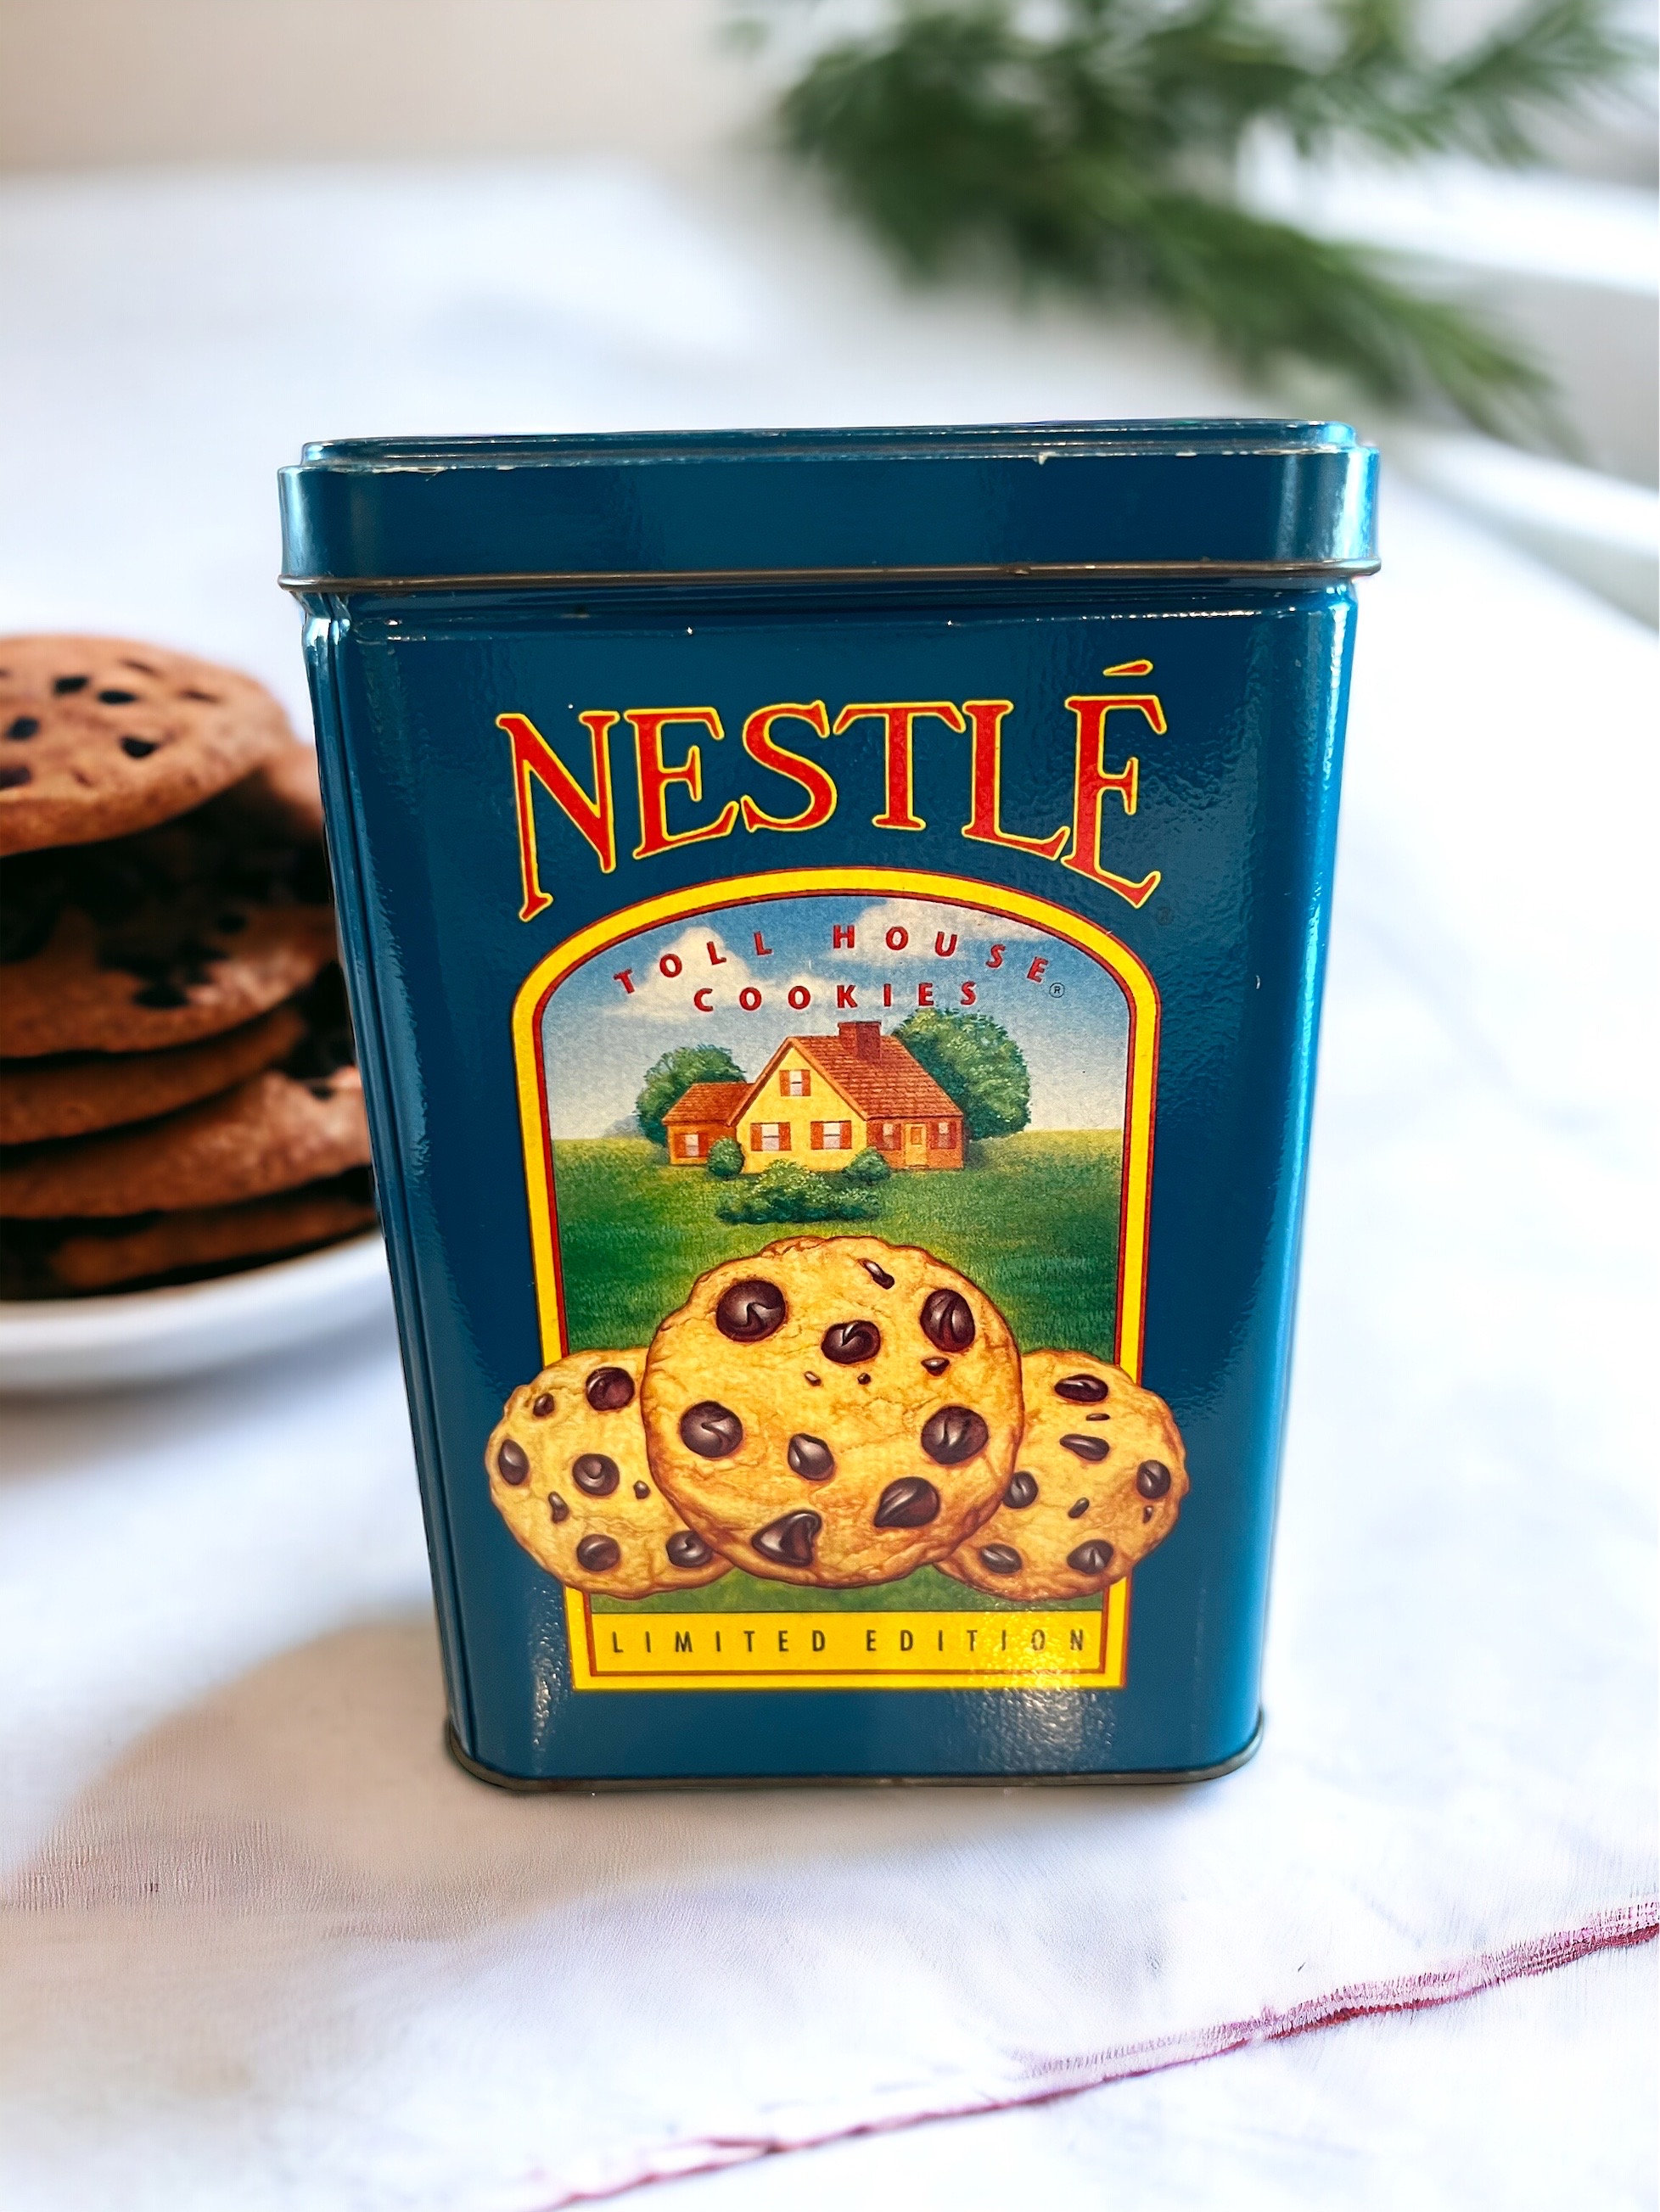 1970s Vintage Yellow Nestle Canister/nestle Toll House Cookie Tin